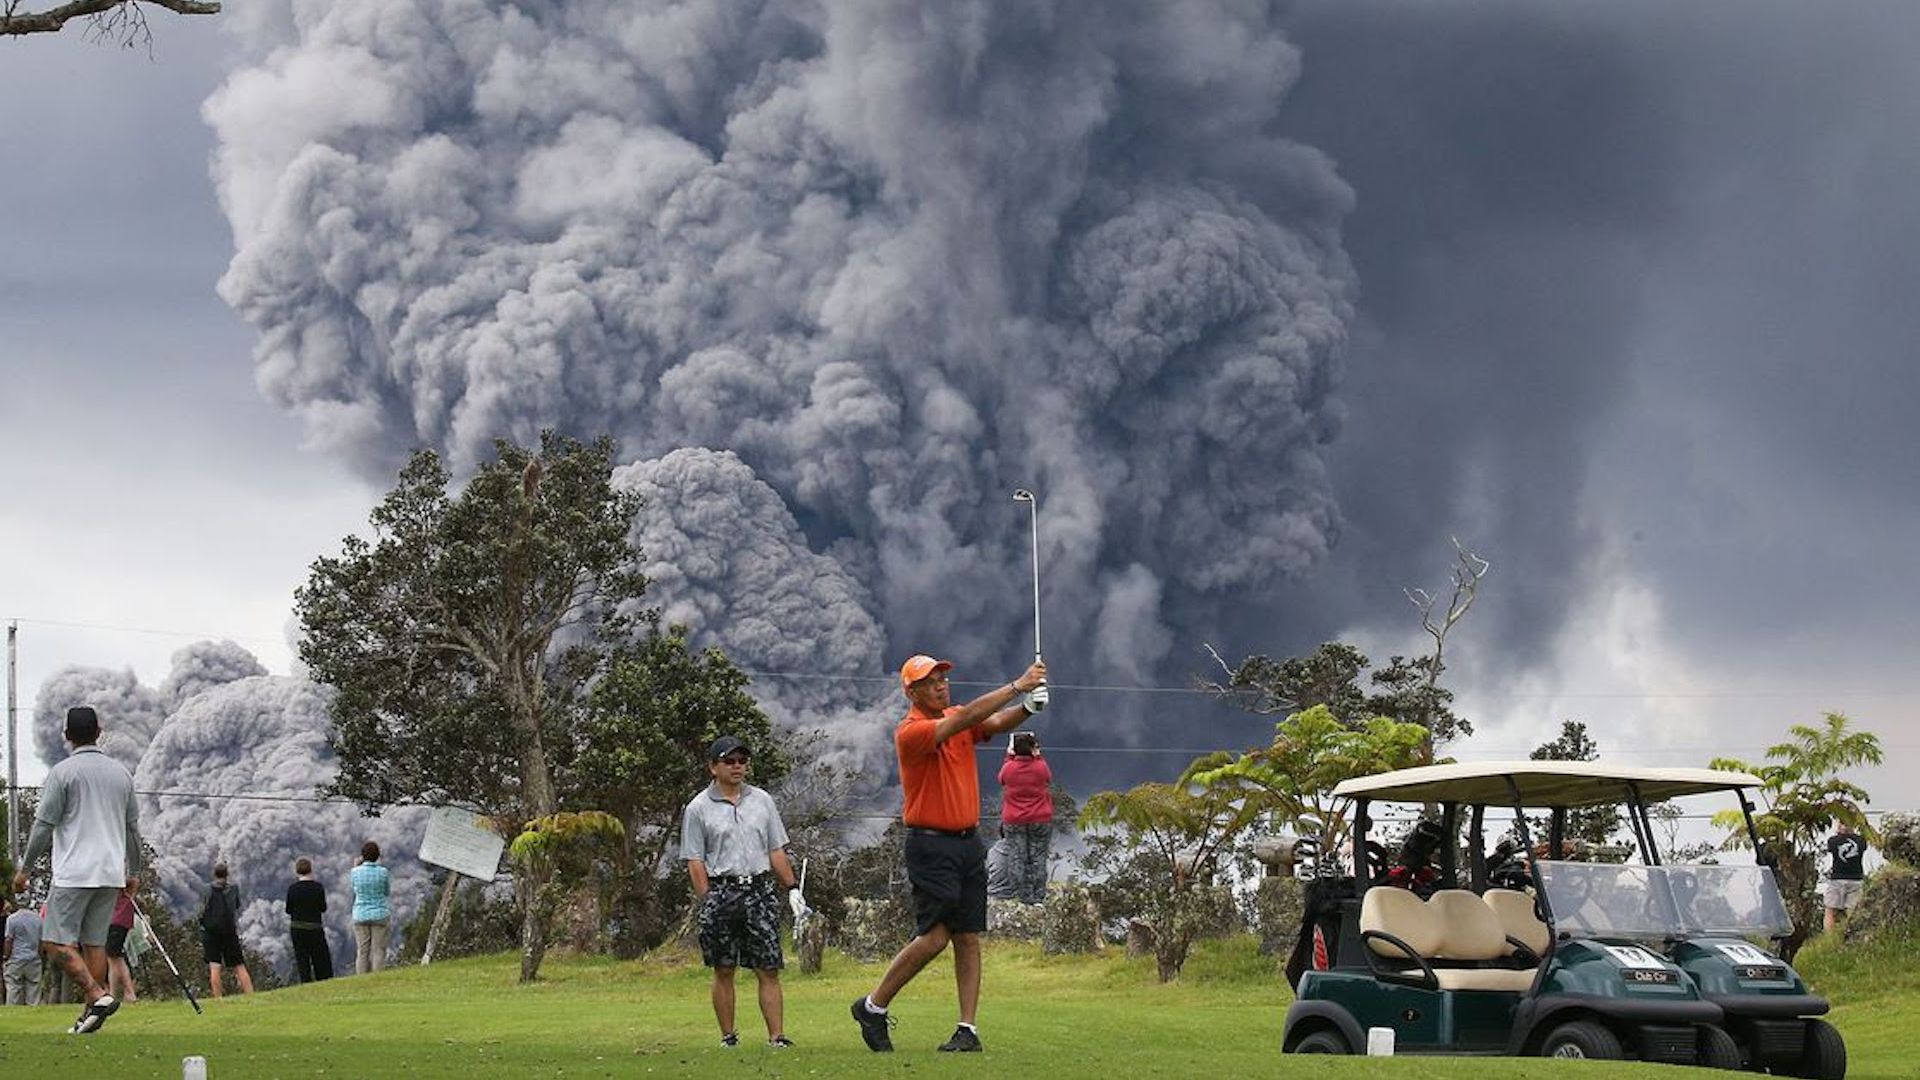 Ash clouds, lava from Hawaii volcano eruption trigger "red alert"